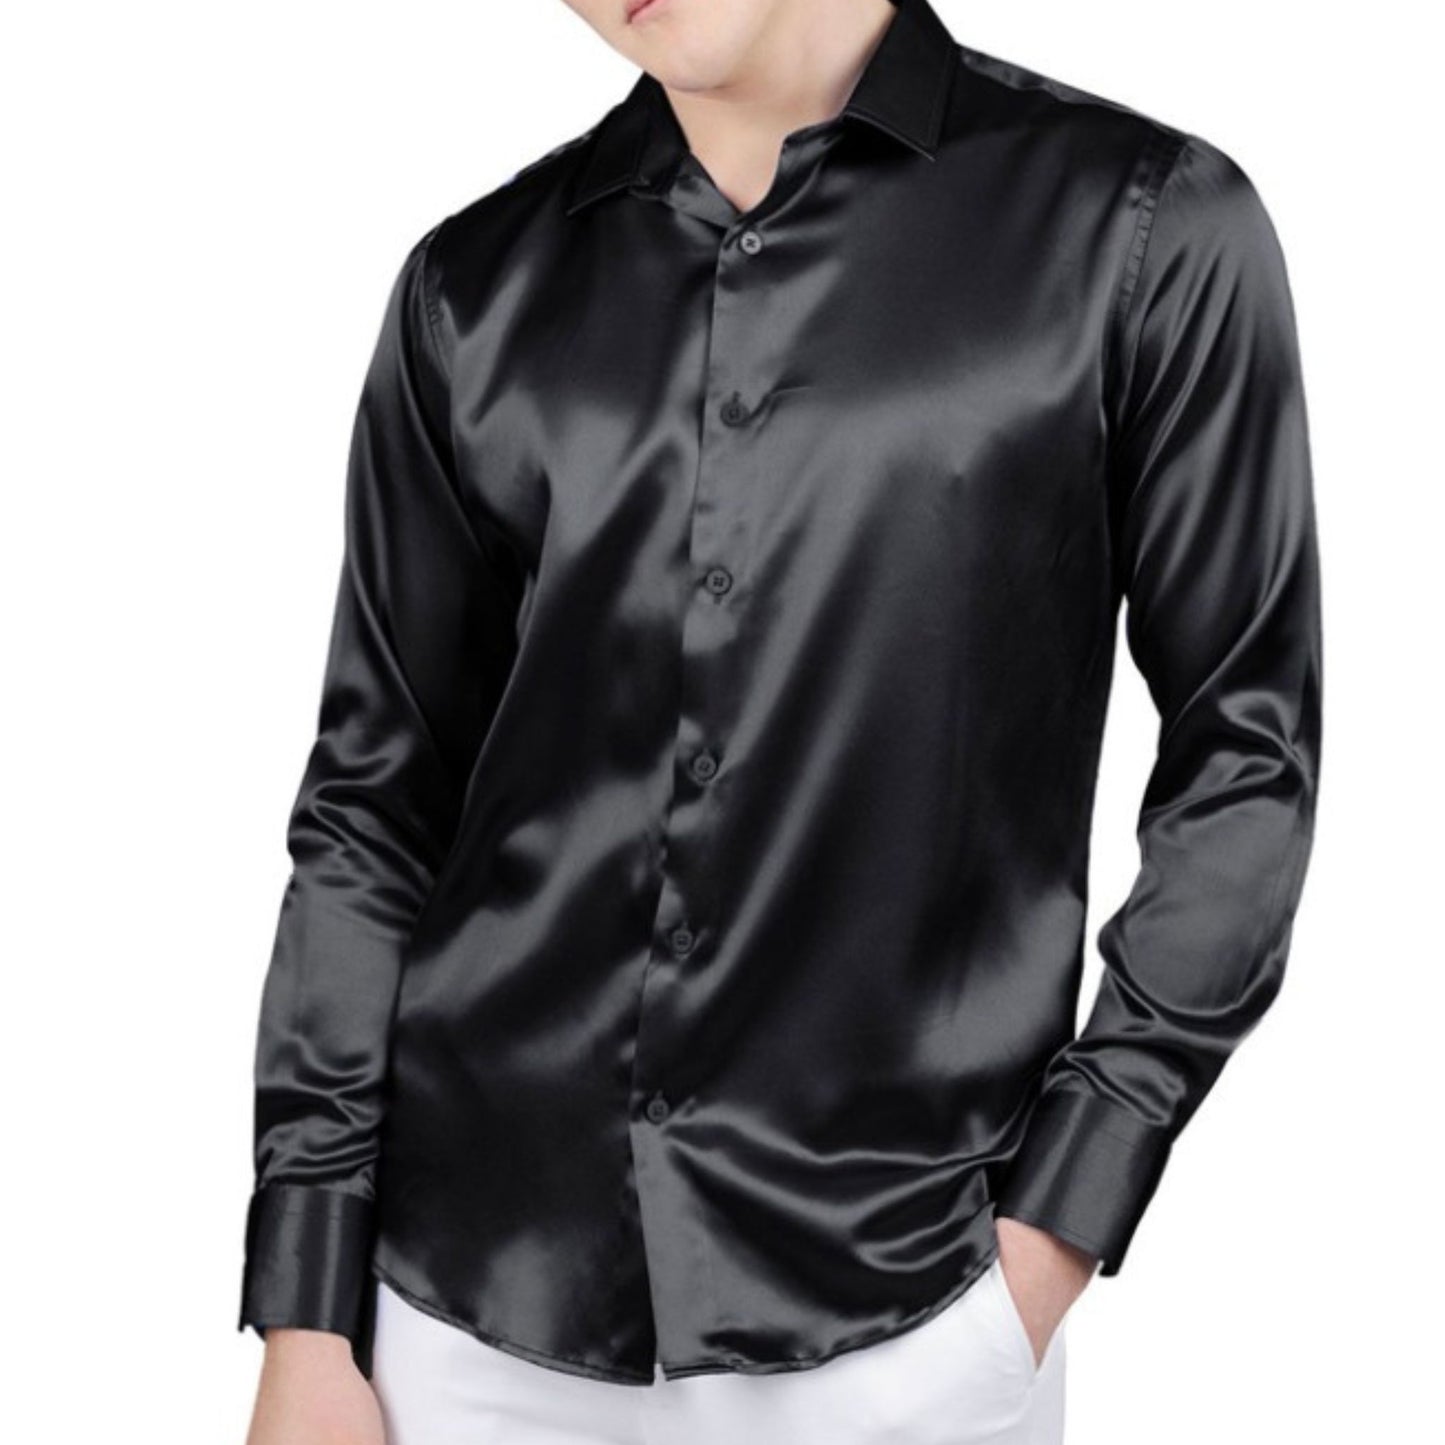 A sophisticated man donning the Black Shiny Shirt by KCT Menswear, exemplifying its sleek design and glossy fabric, ideal for making a statement at formal gatherings.